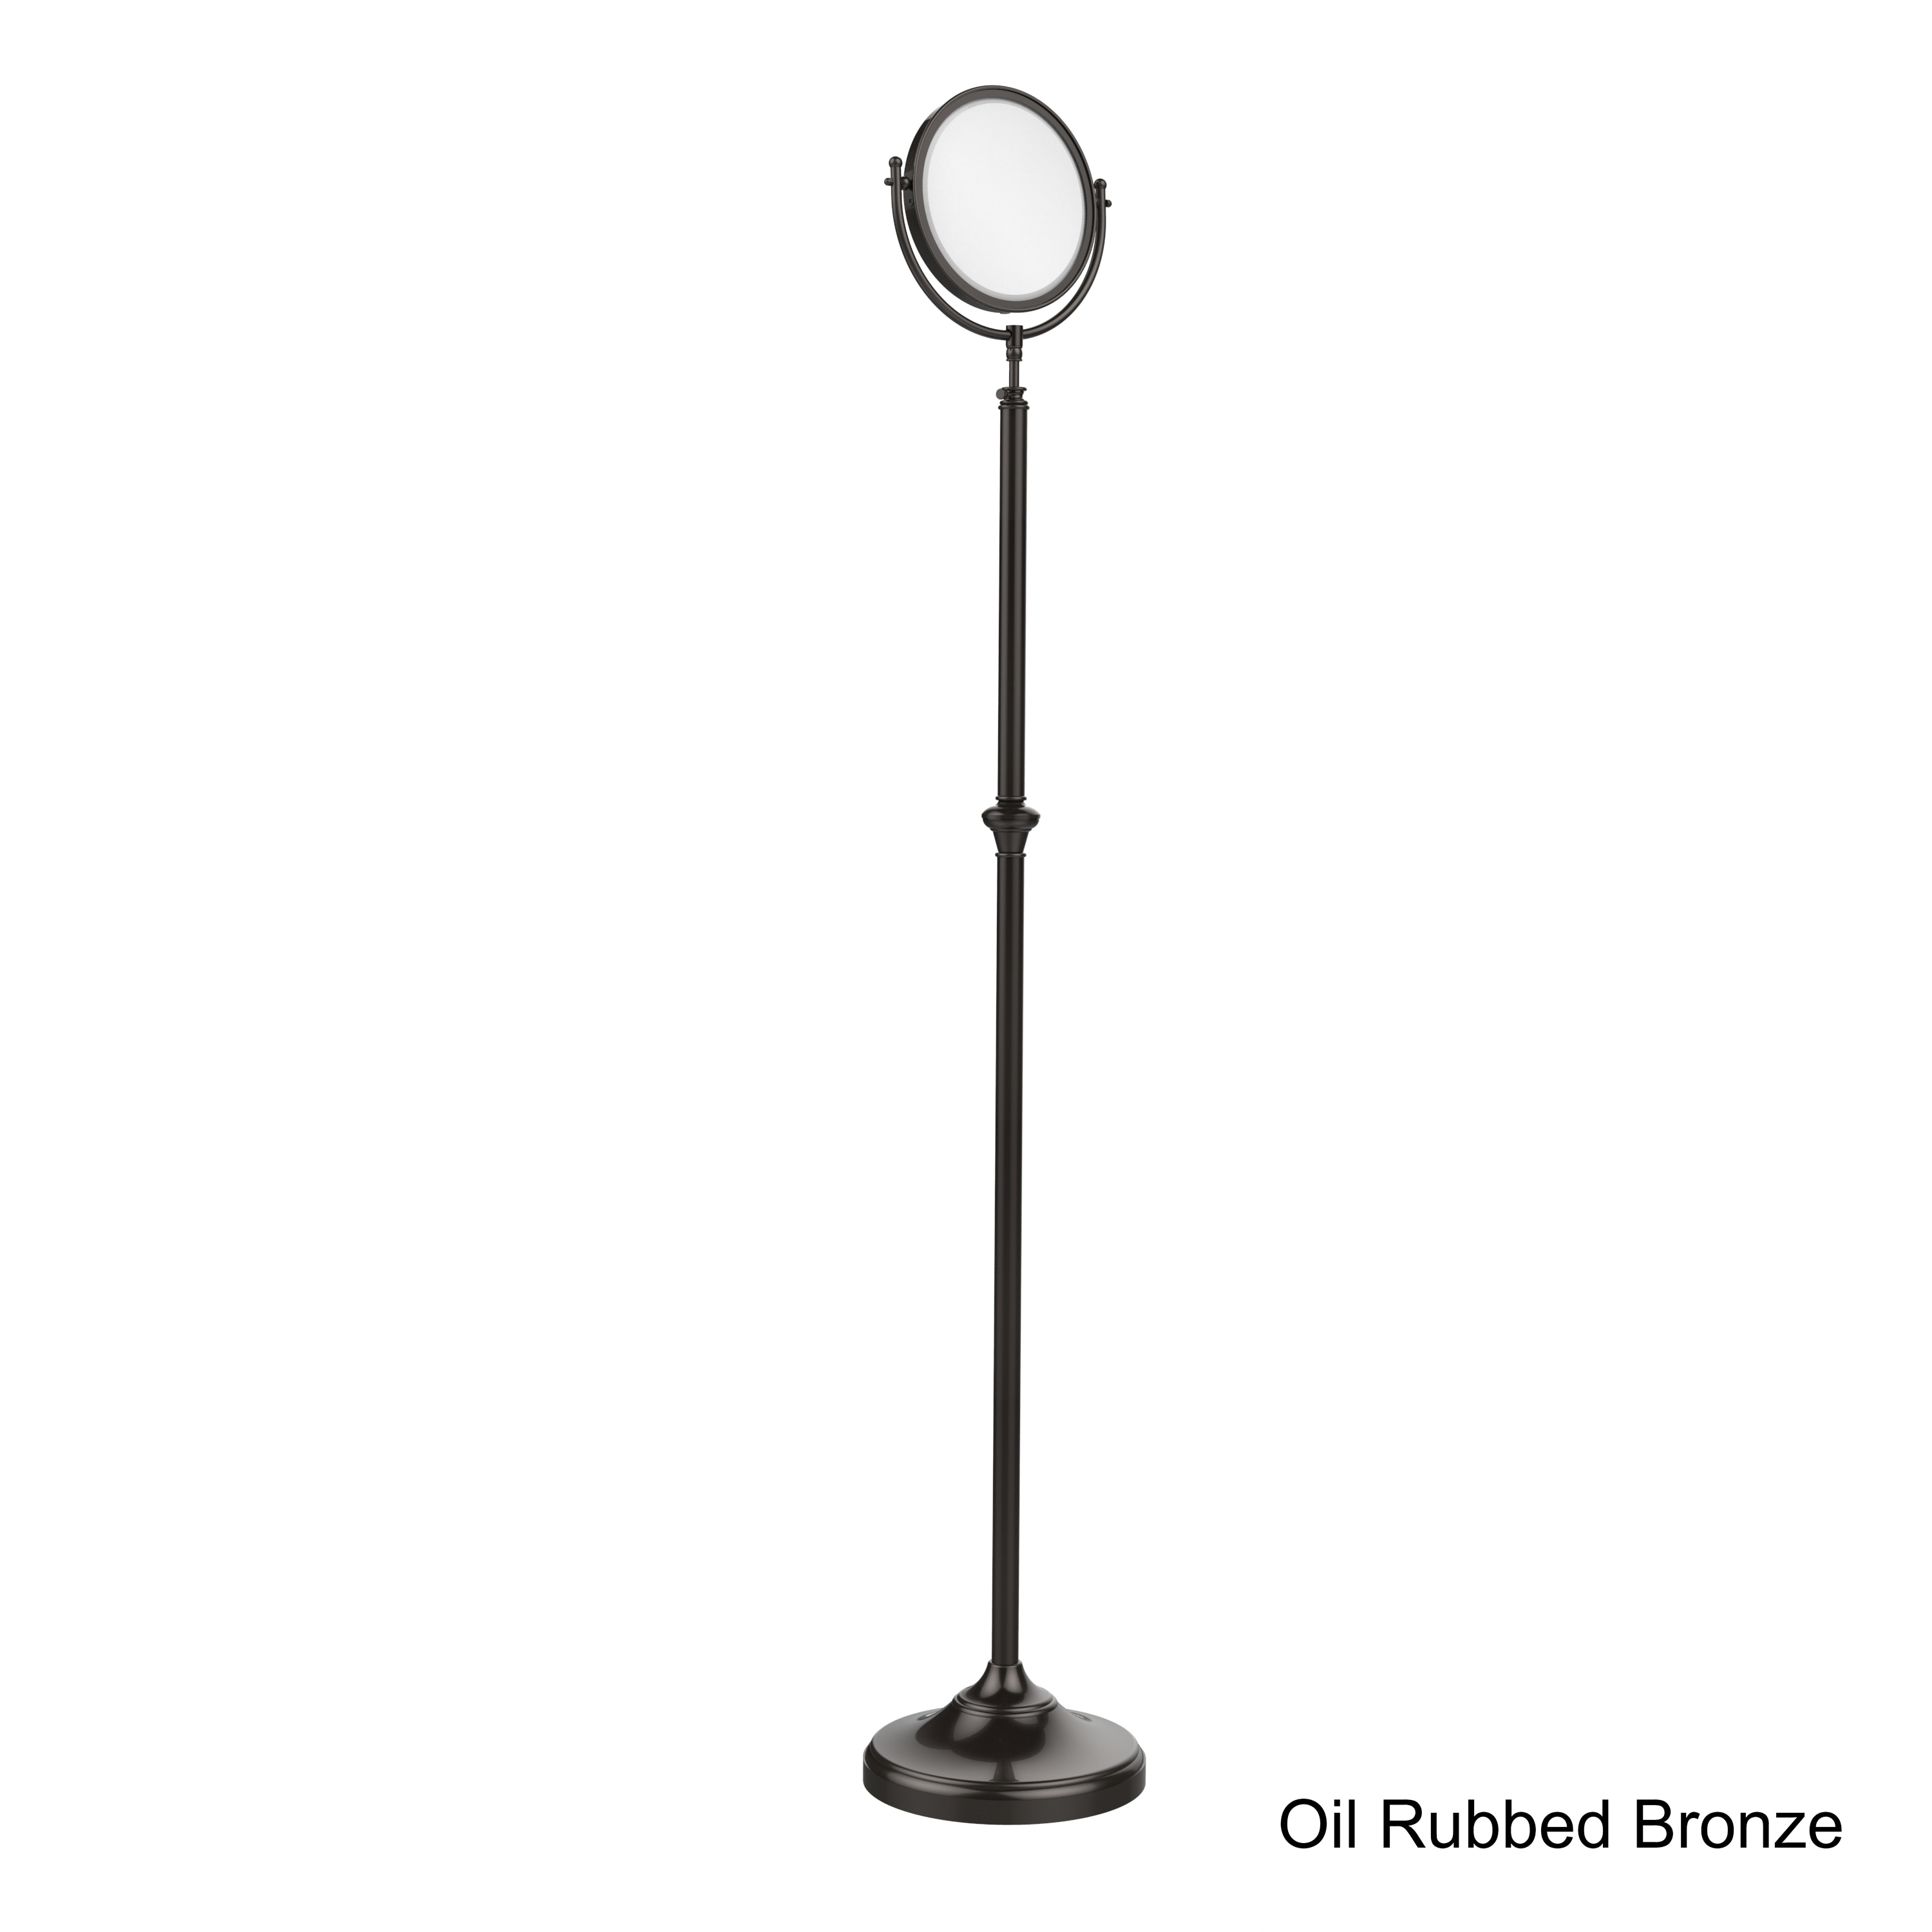 https://ak1.ostkcdn.com/images/products/12315466/Allied-Brass-Adjustable-Height-Floor-Standing-Make-Up-Mirror-8-Inch-Diameter-with-2X-Magnification-e7d69db2-1ff5-4495-b446-07b516223561.jpg